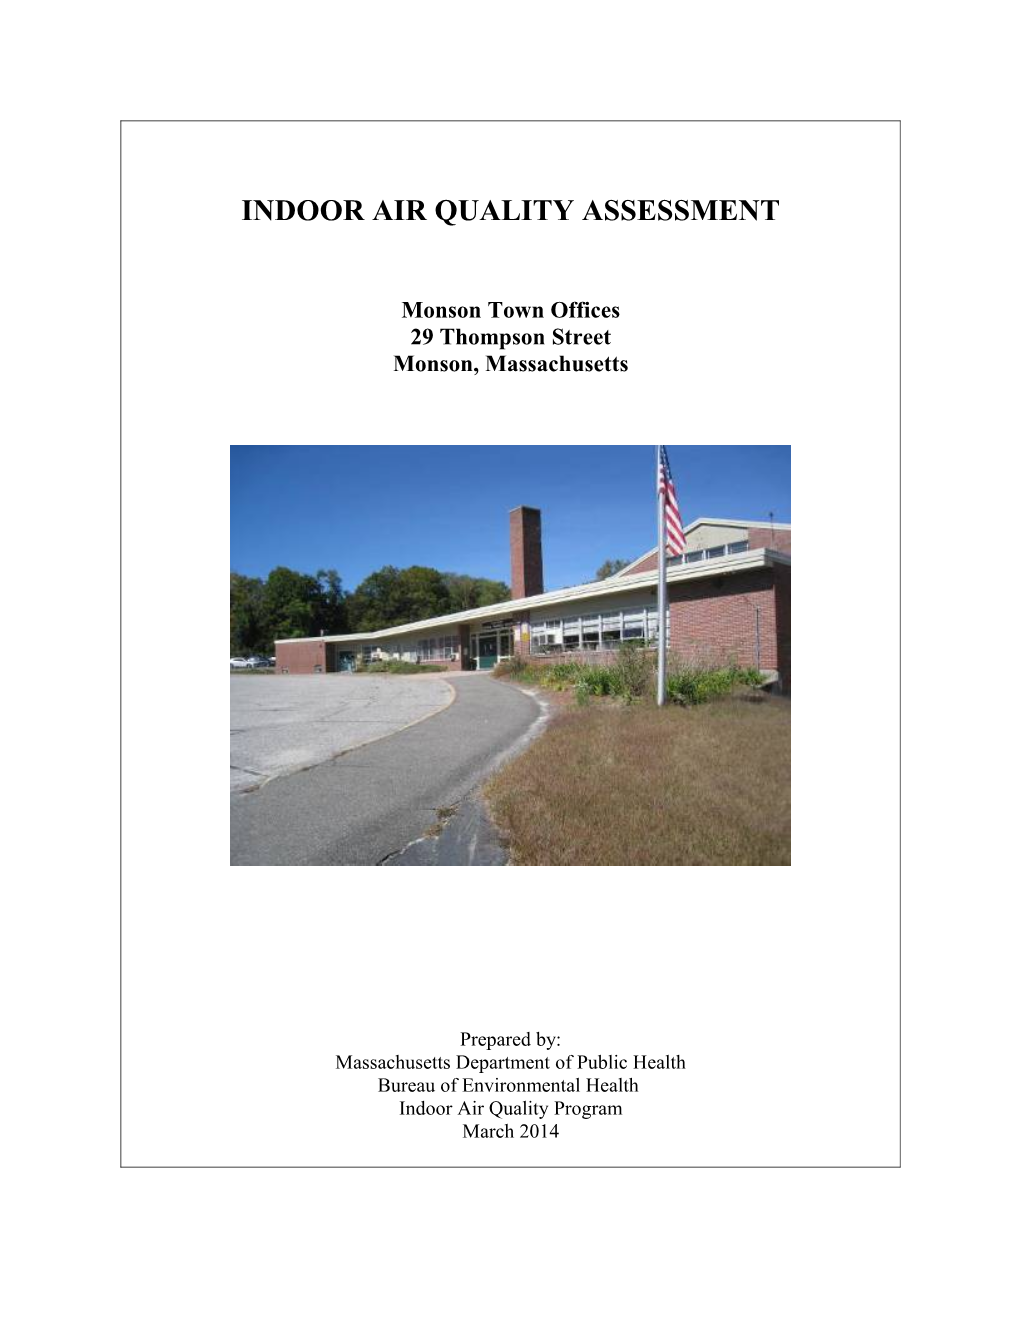 Indoor Air Quality Assessment - Monson Town Offices